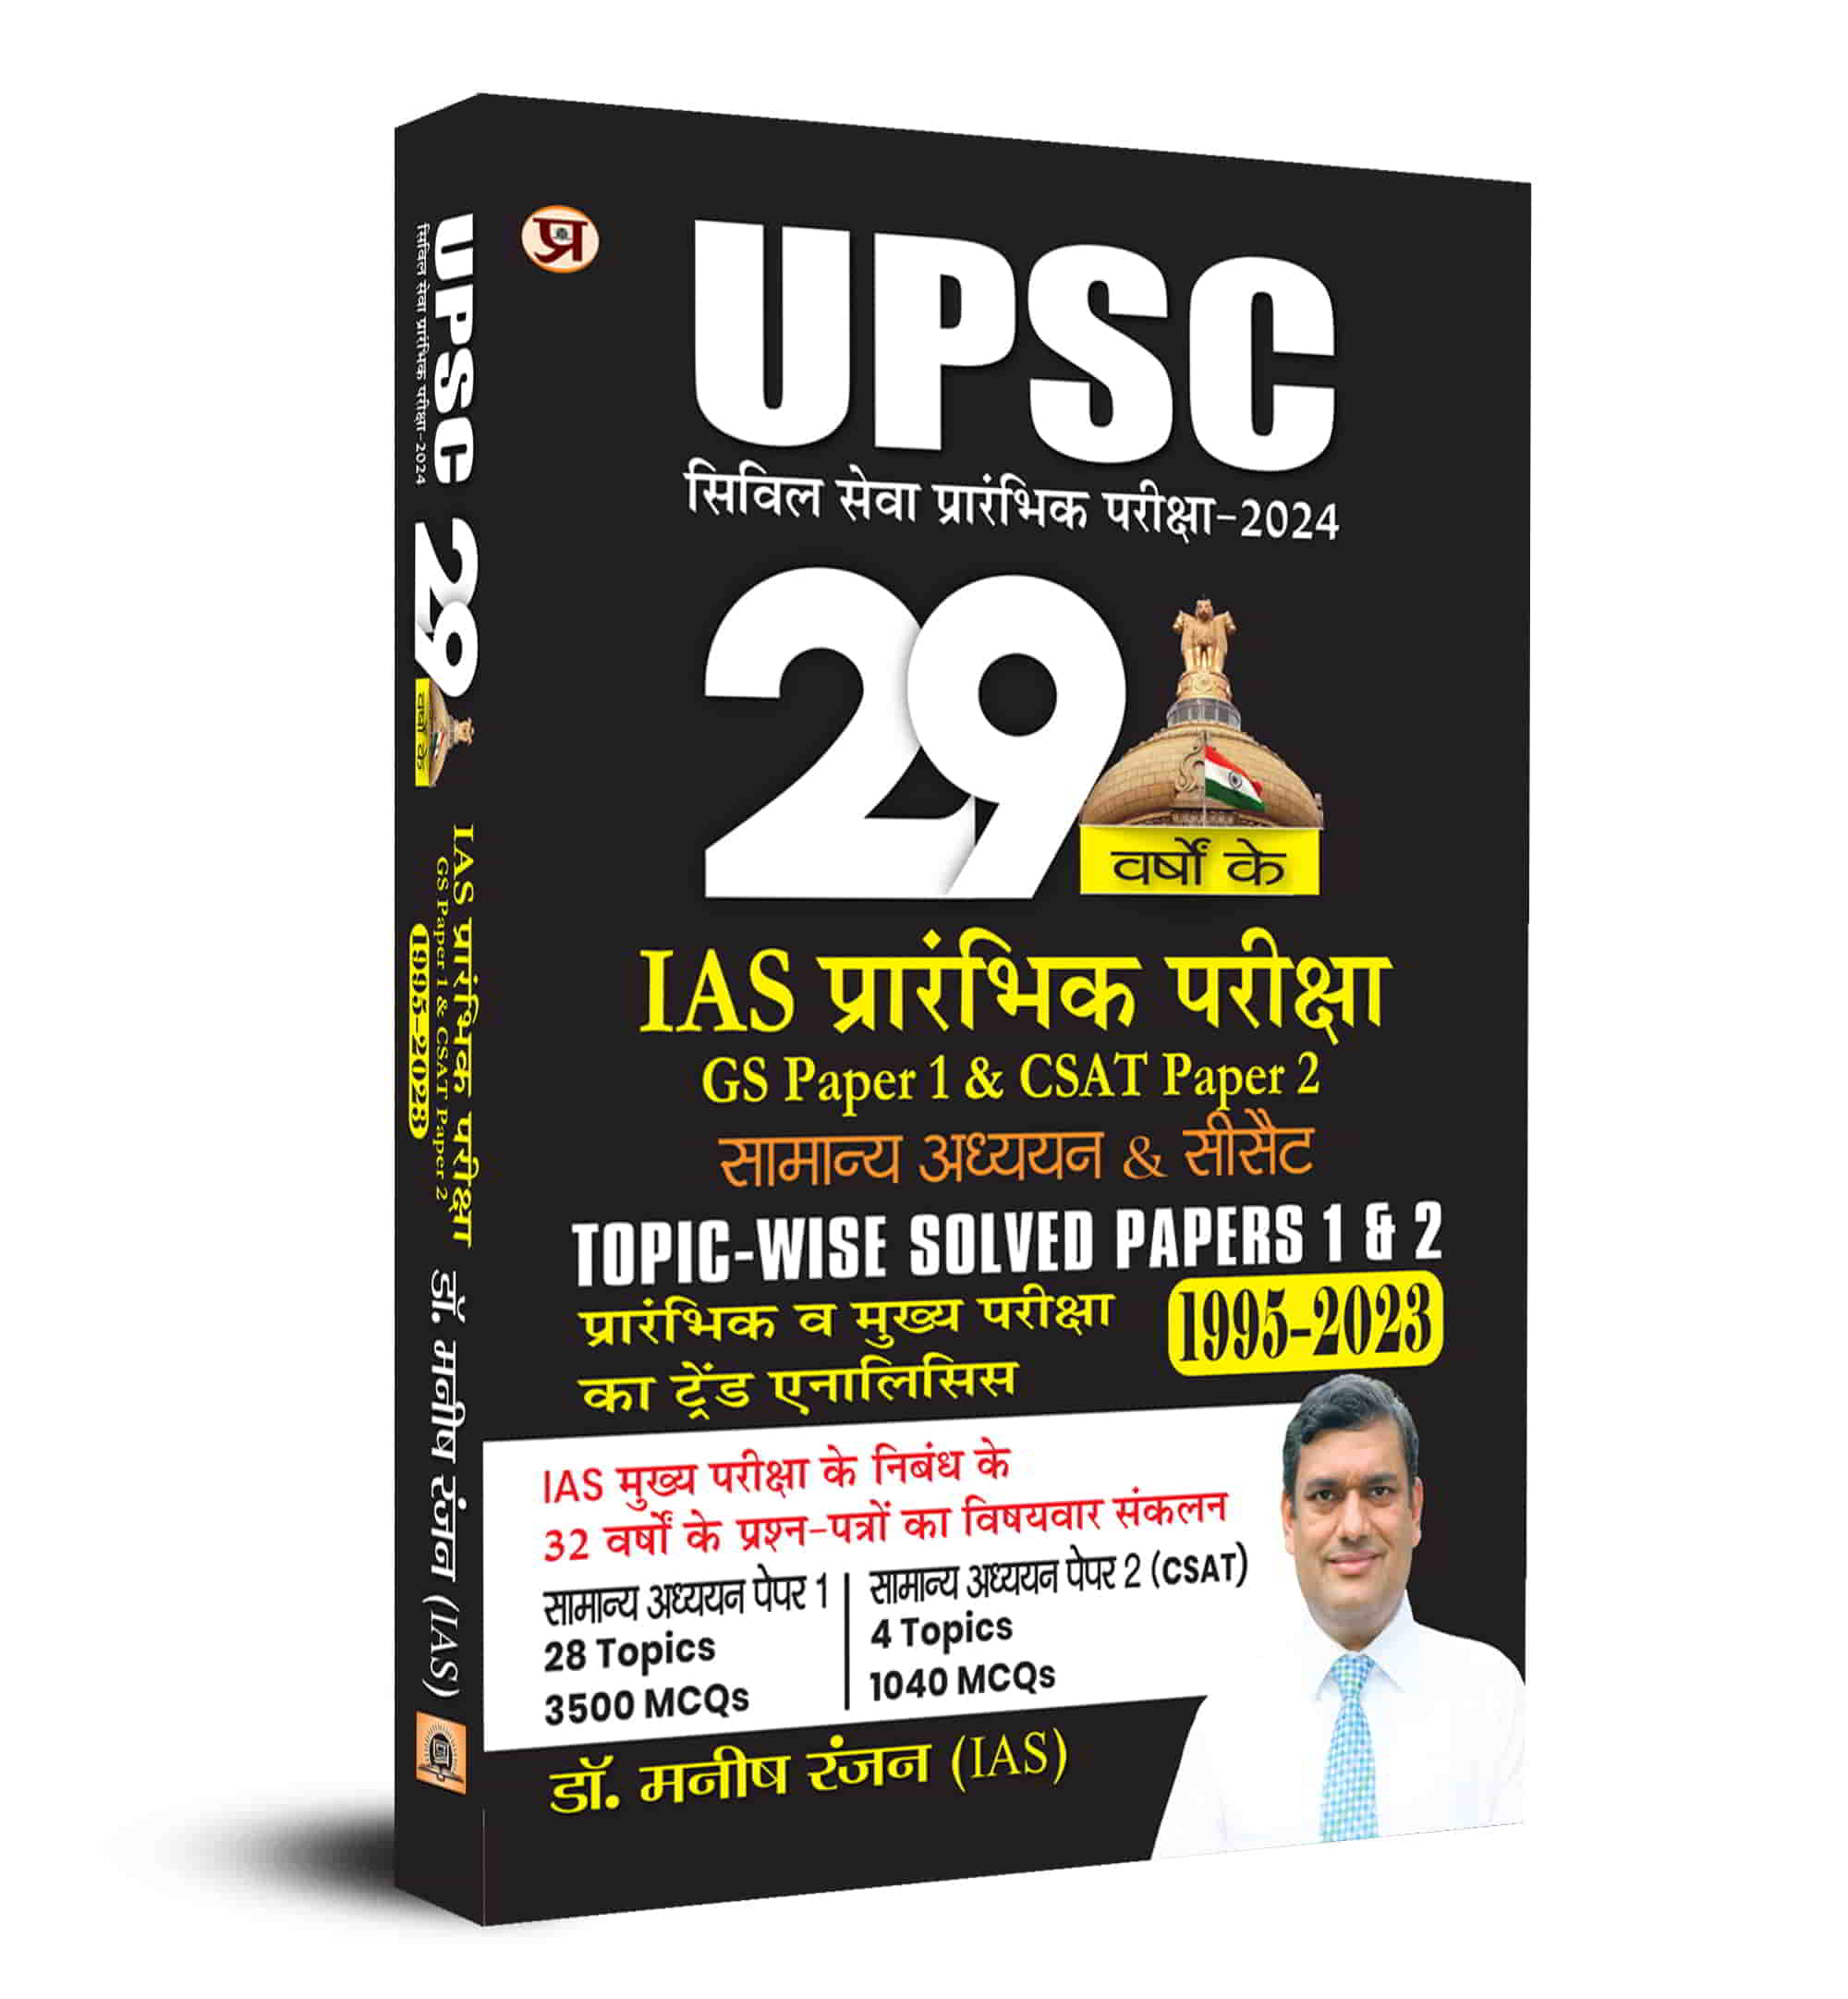 UPSC 29 Years Civil Services IAS Prelims Topic-wise Solved Papers 1 and 2 General Studies CSAT 1995 - 2023 Trend Analysis Book In Hindi